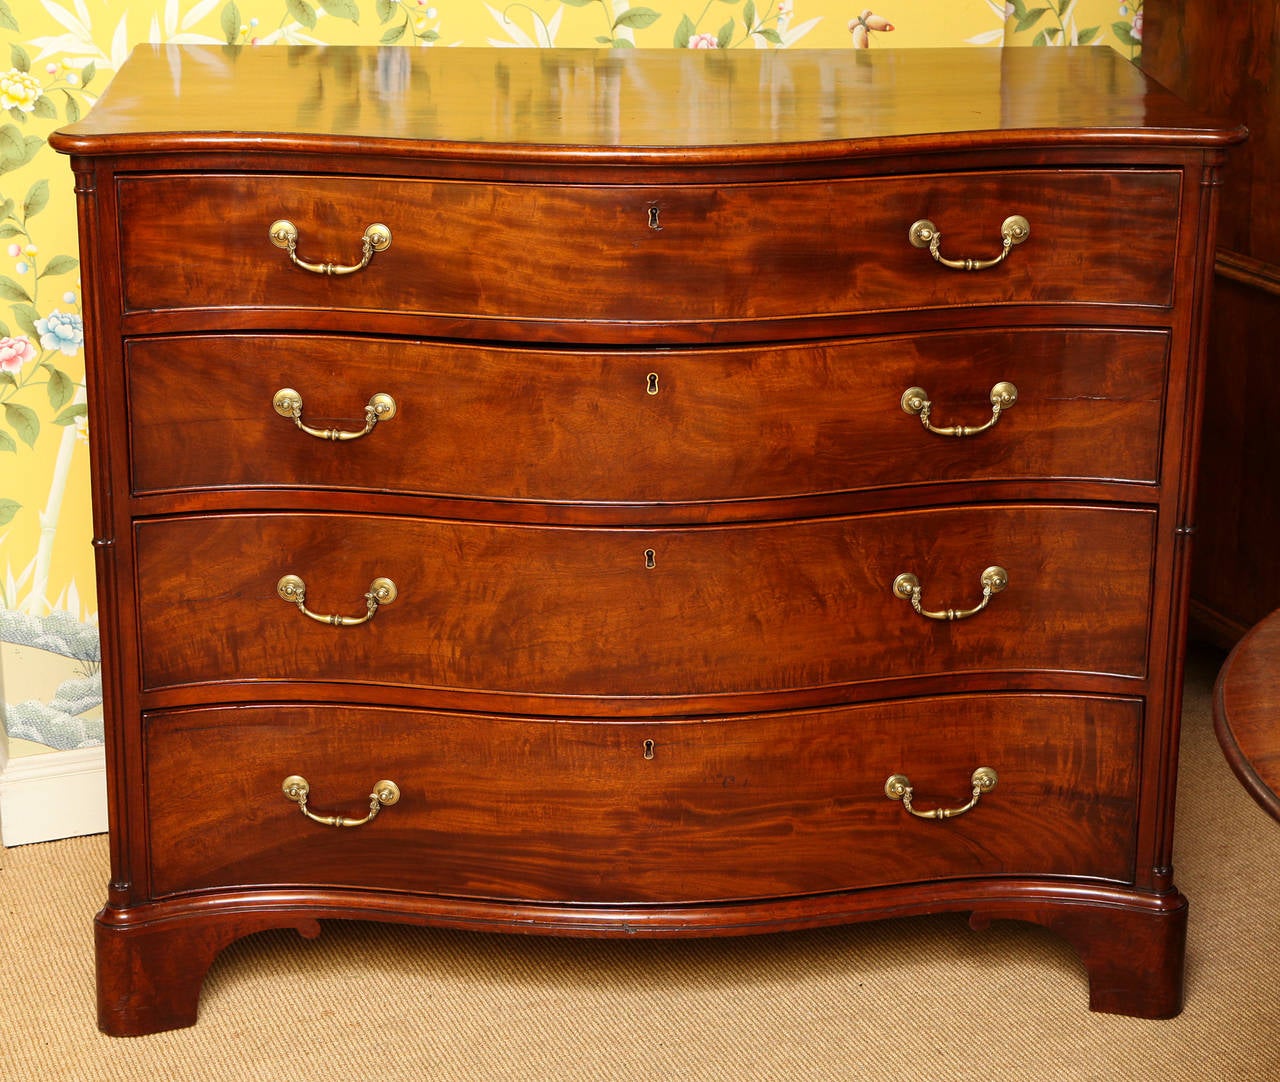 Fine antique large-scale Chippendale period serpentine mahogany chest of drawers, having a figured overhung thumb moulded top, above four figured graduated cockbeaded drawers and having cluster columns to the front corners. This Fine chest retains